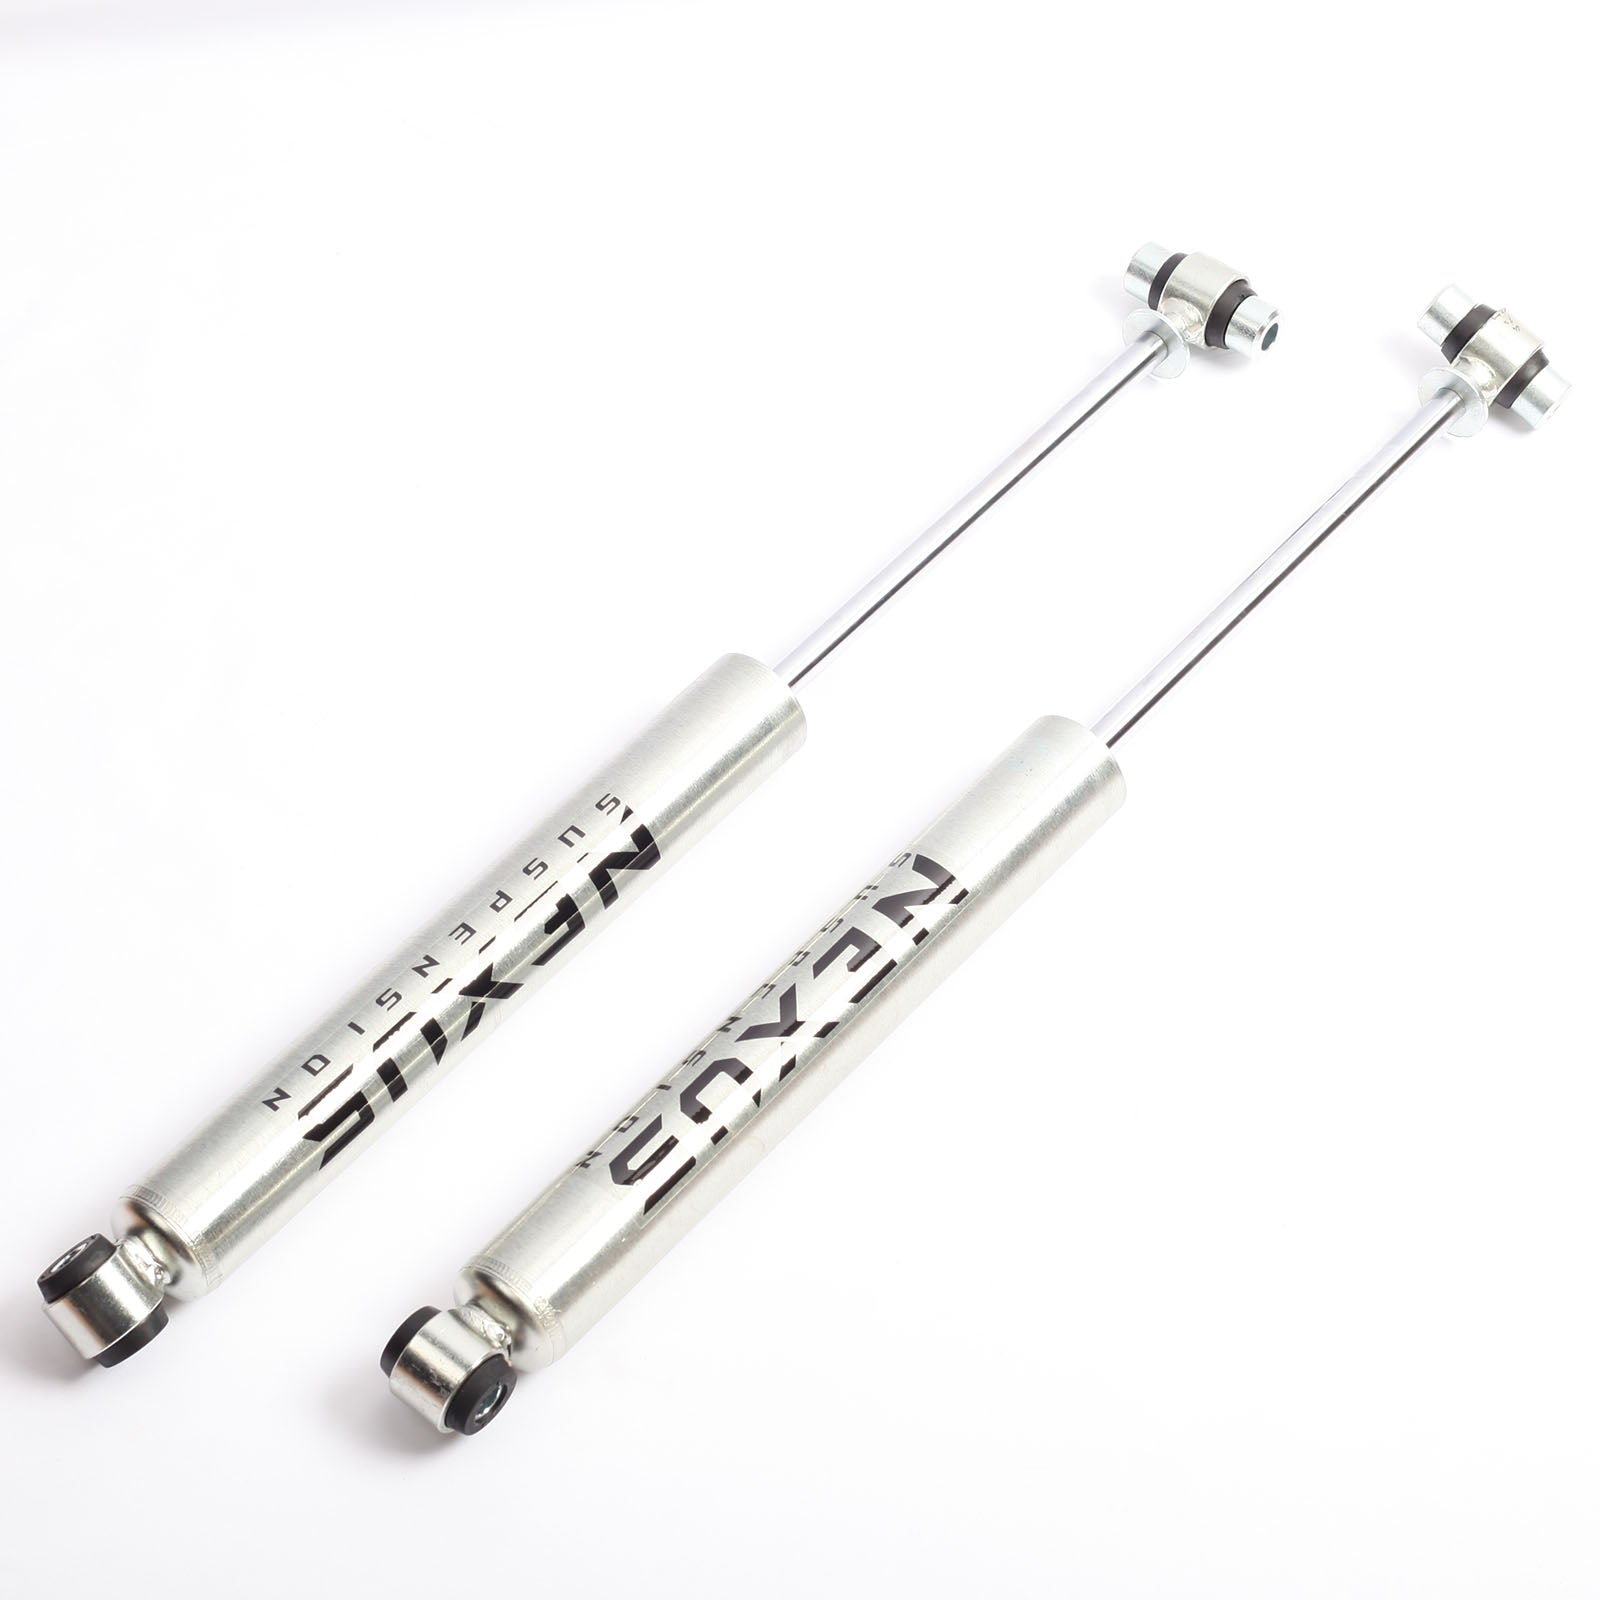 NEXUS SUSPENSION 2-3 Inch Lift Rear Shock Absorber for 1998-2009 Ford Ranger 2wd,Zinc Plated Coating,Pair Pack